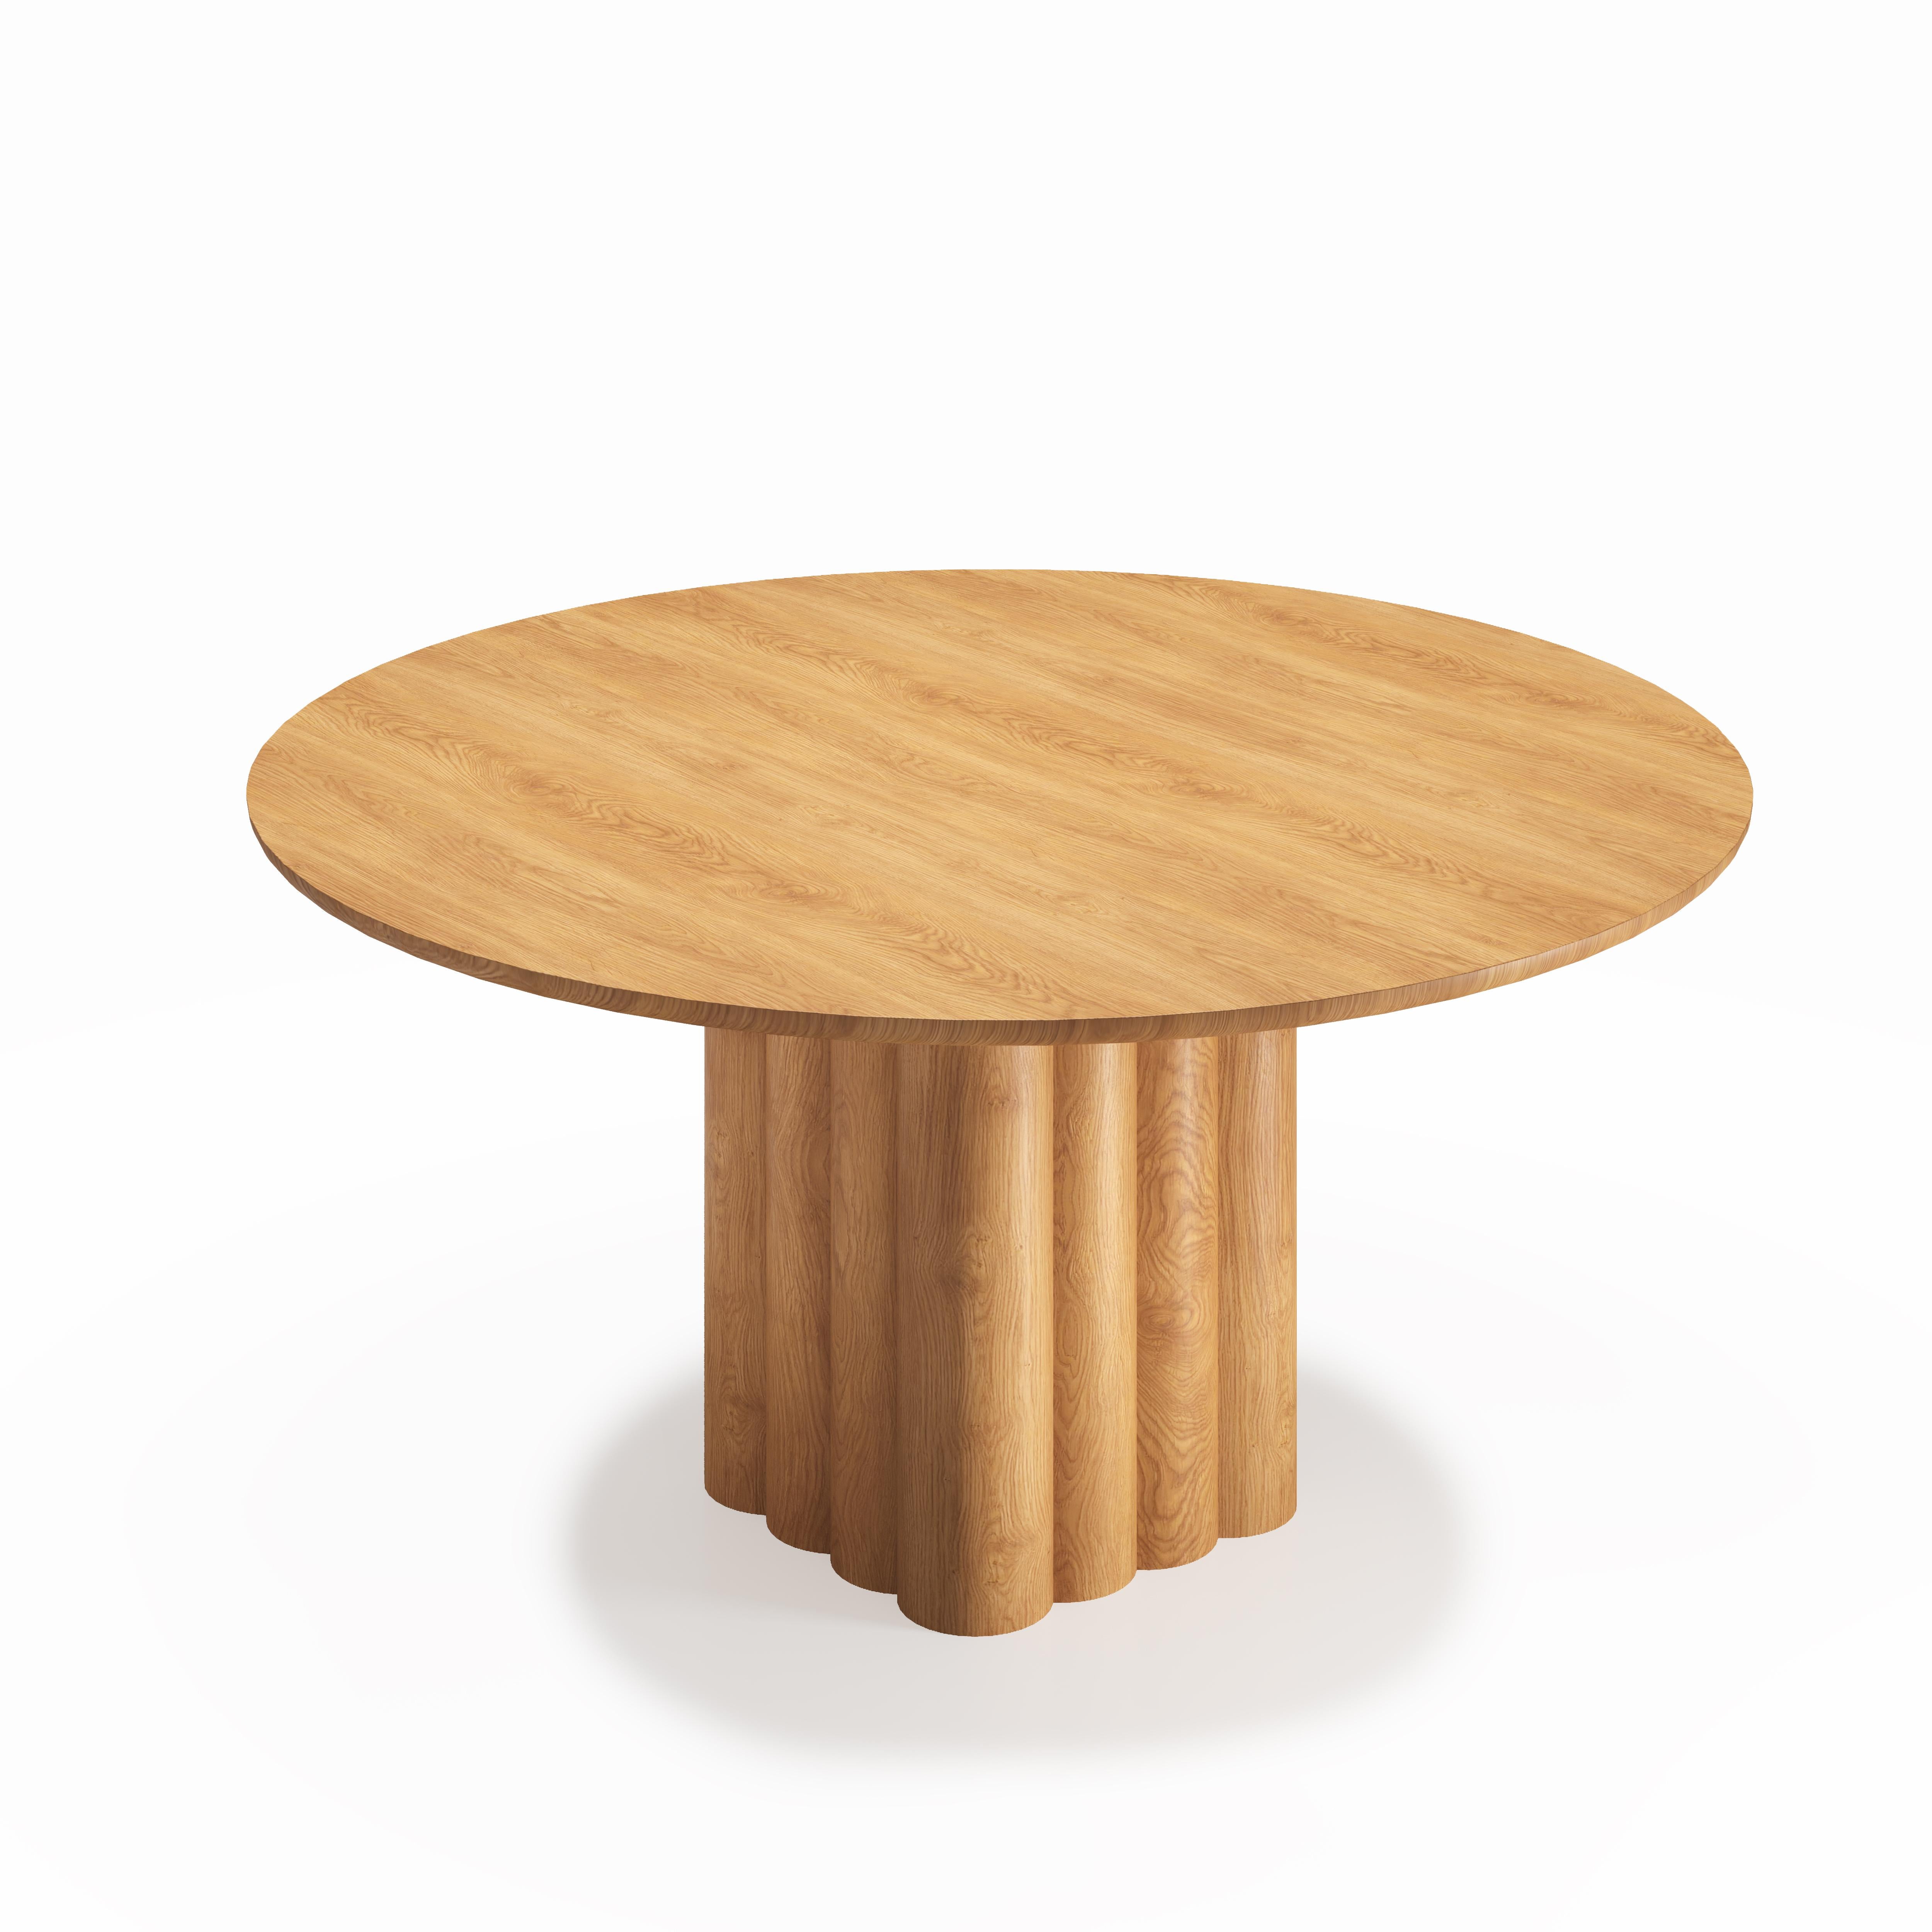 Round Dining Table 'Plush' by Dk3, Smoked Oak or Walnut, 140 cm For Sale 1